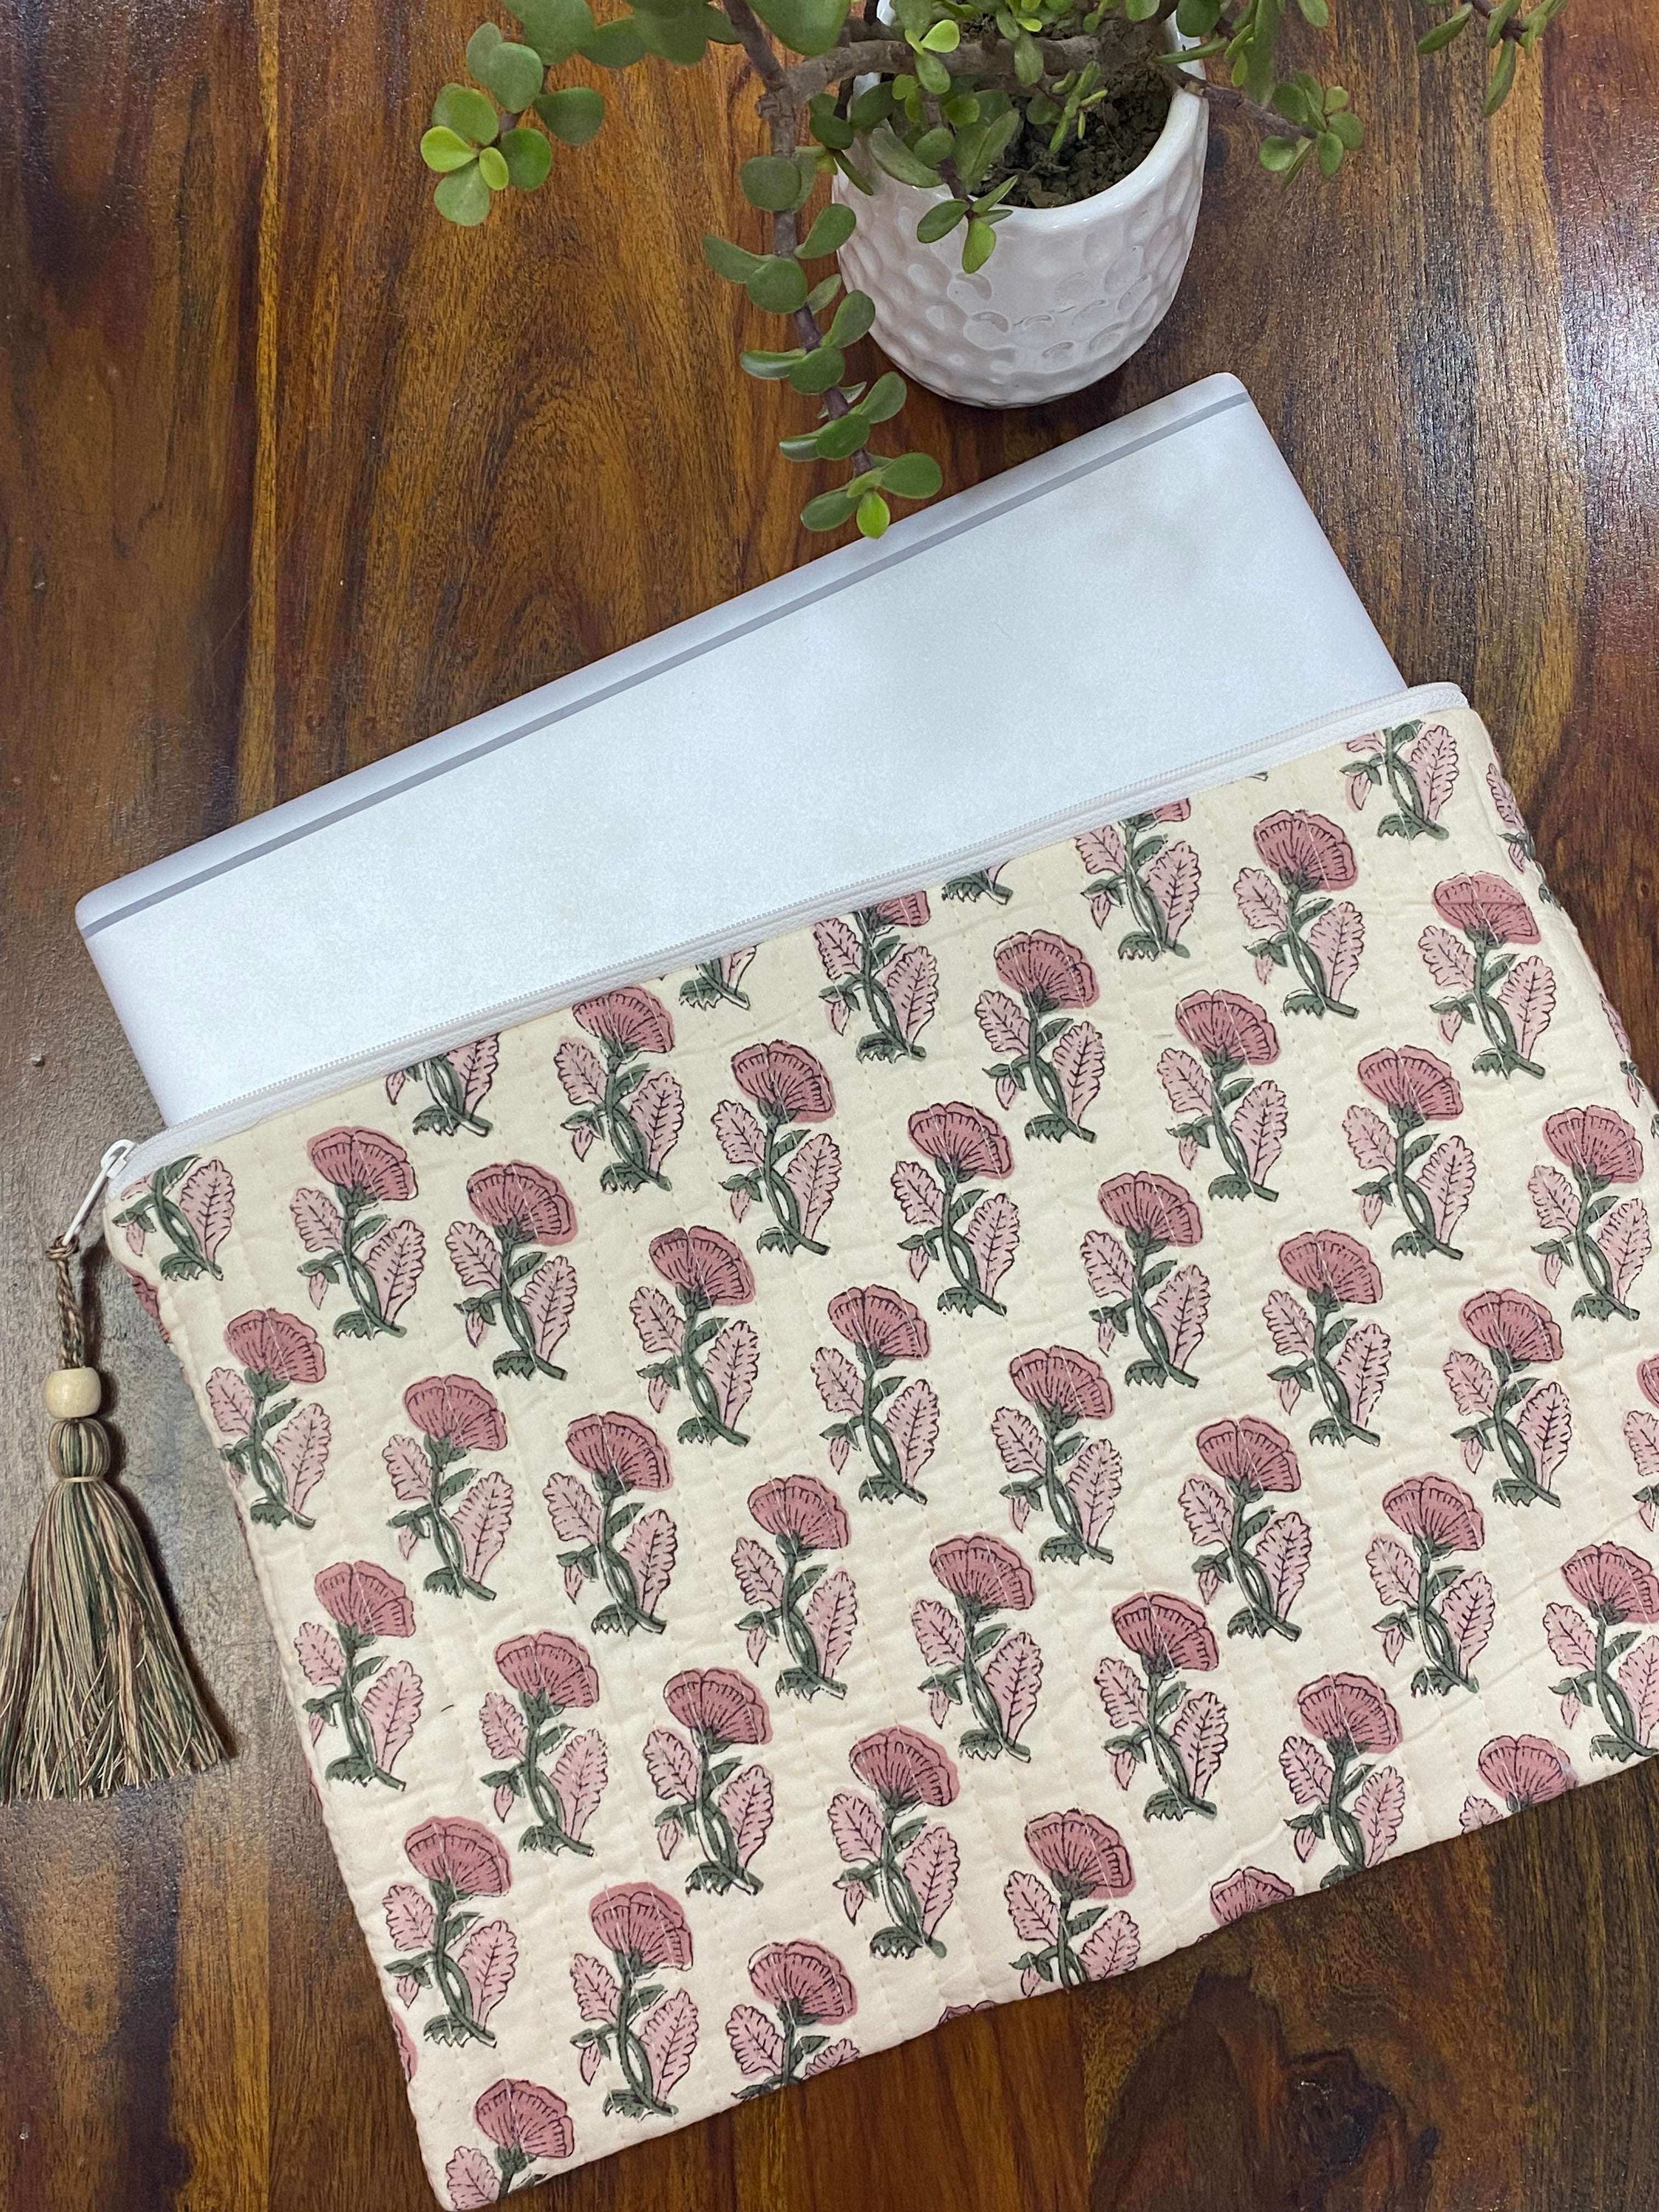 Laptop Sleeve/ Cover - 13 inch